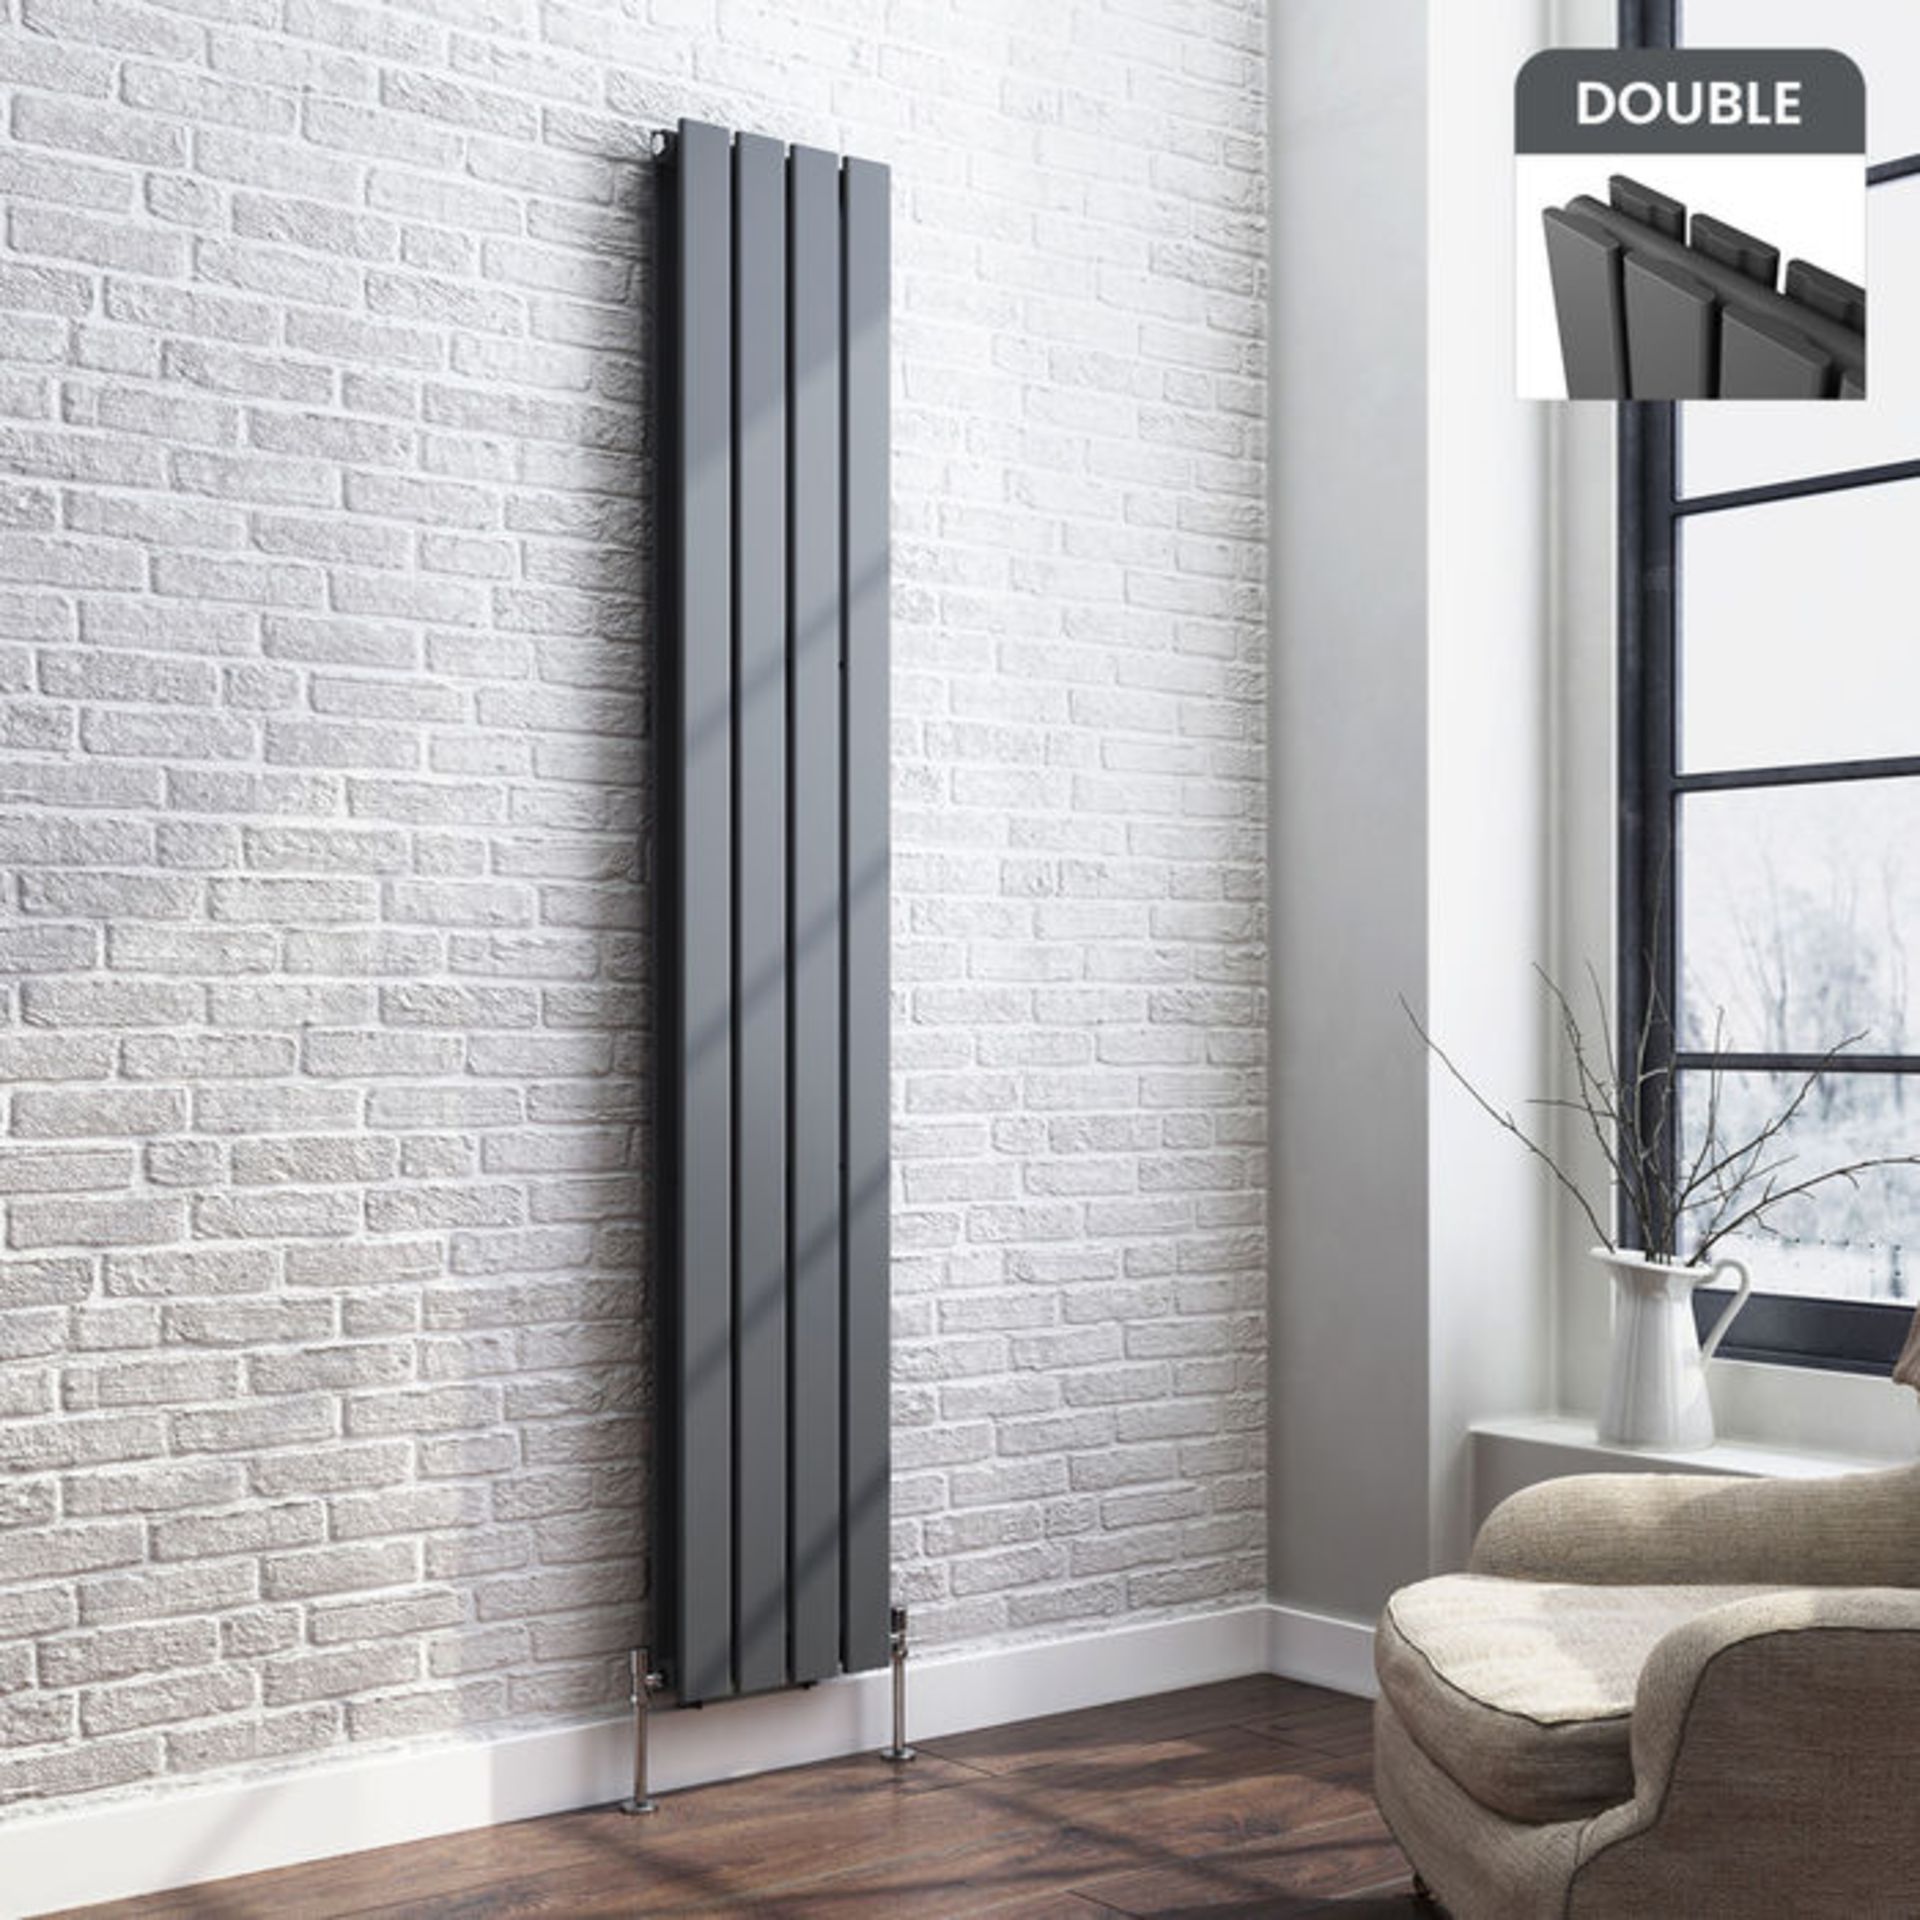 (AL184) 1800x300mm Anthracite Double Flat Panel Vertical Radiator. RRP £399.99. Made with low carbon